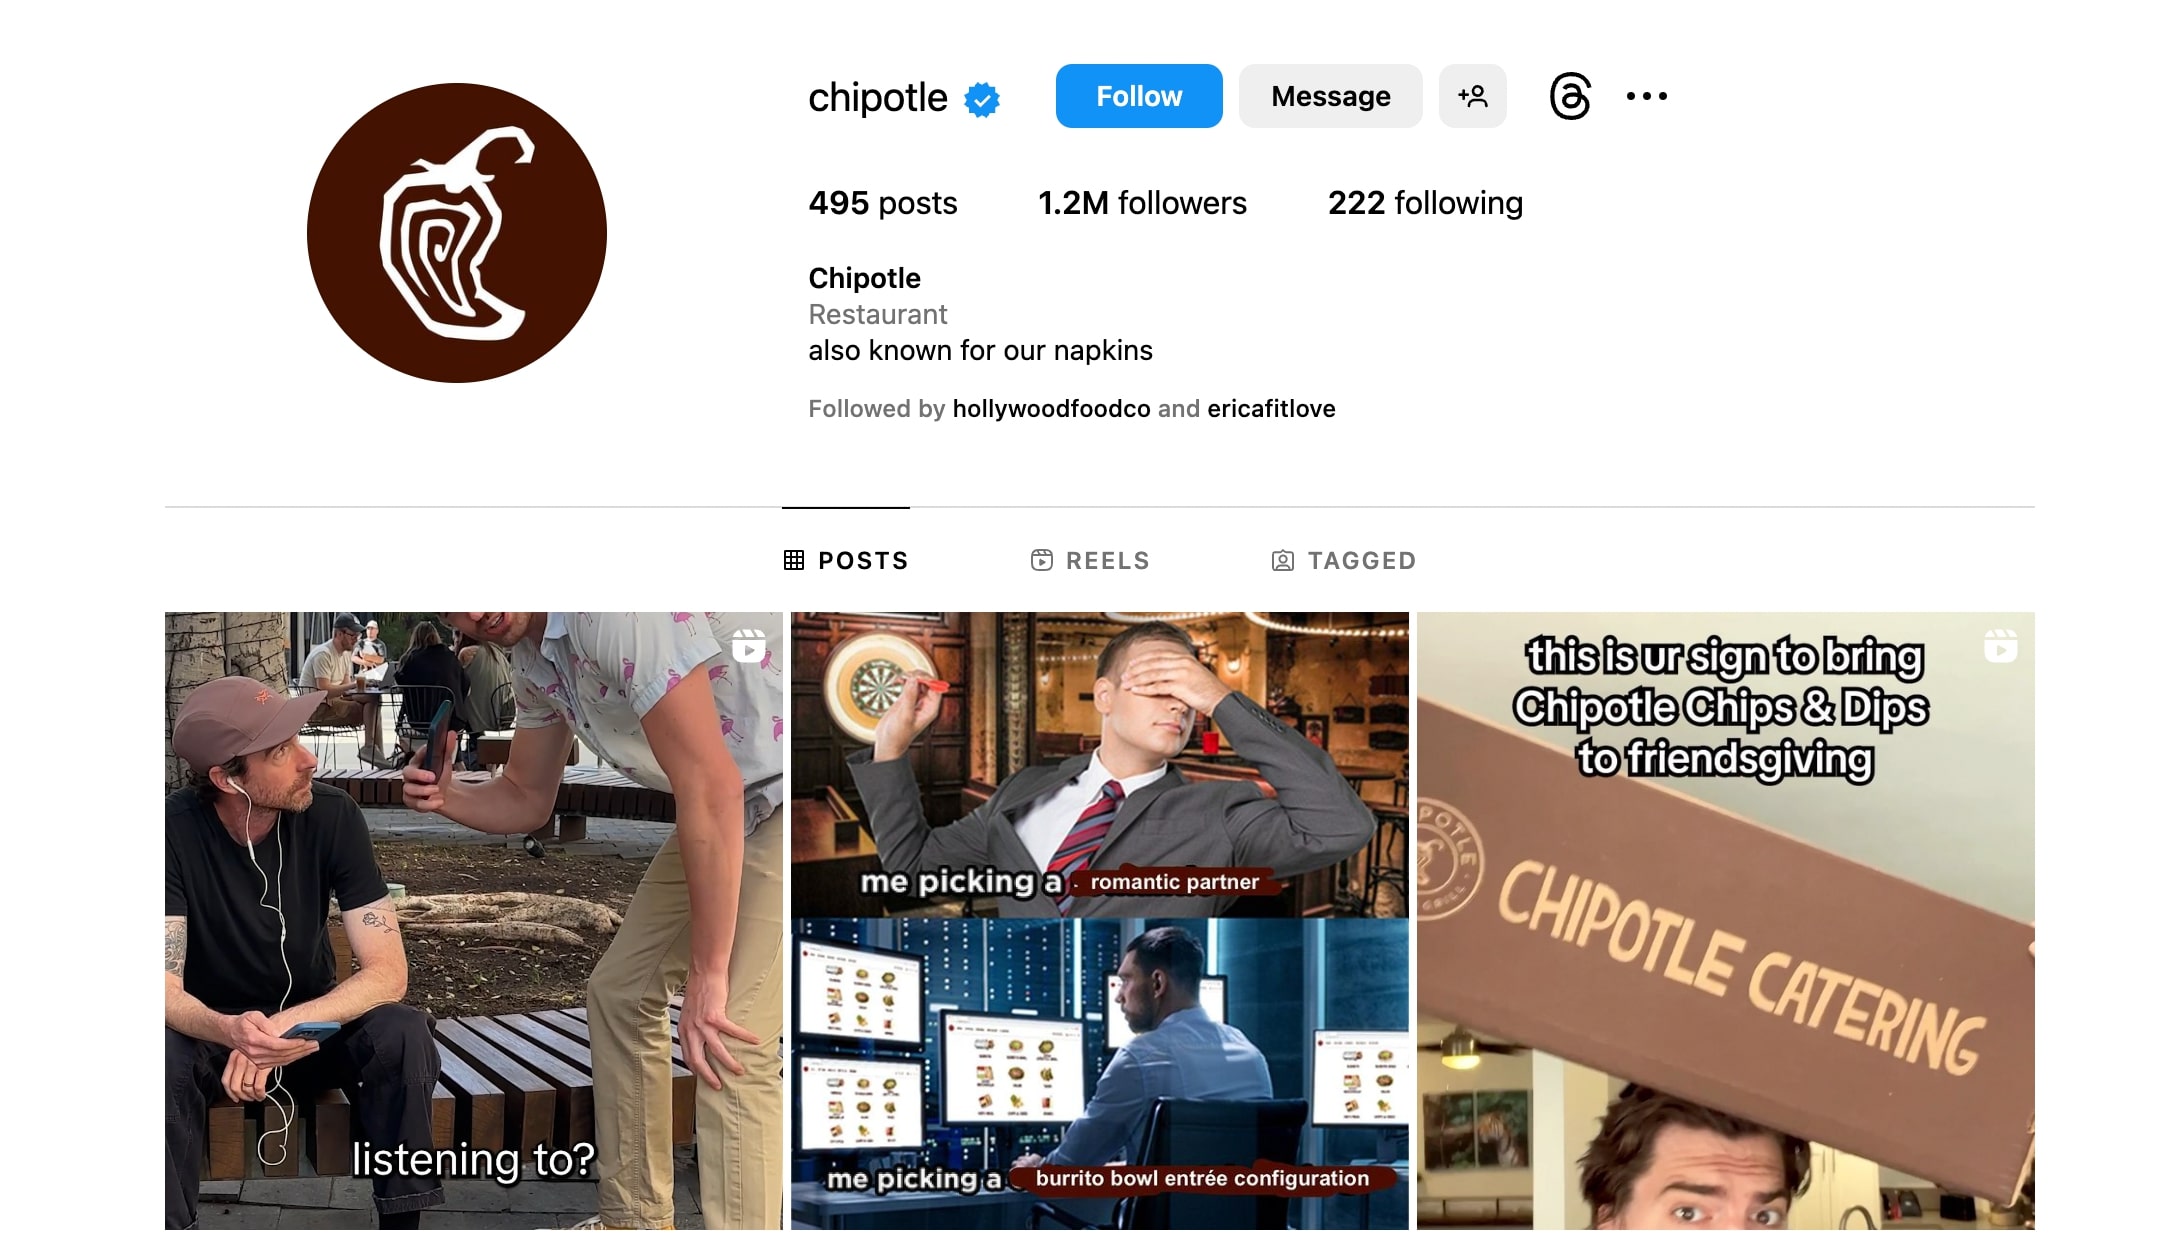 chipotle-social-media-strategy-example